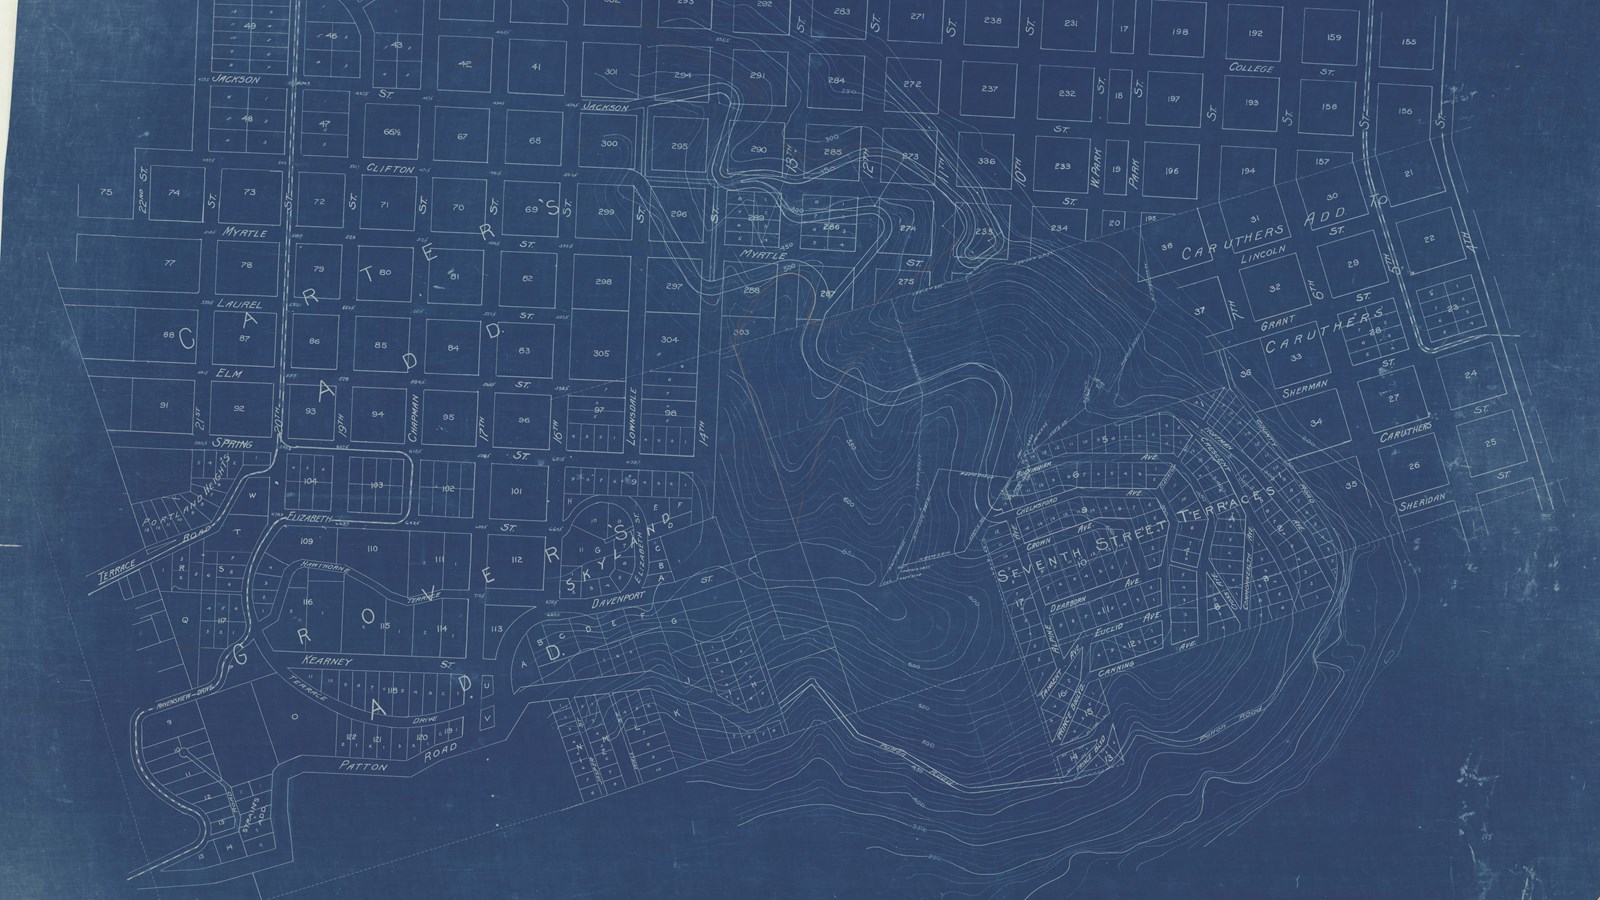 Blueprint of city with straight lined streets and lots for building, with hilly area on edge 